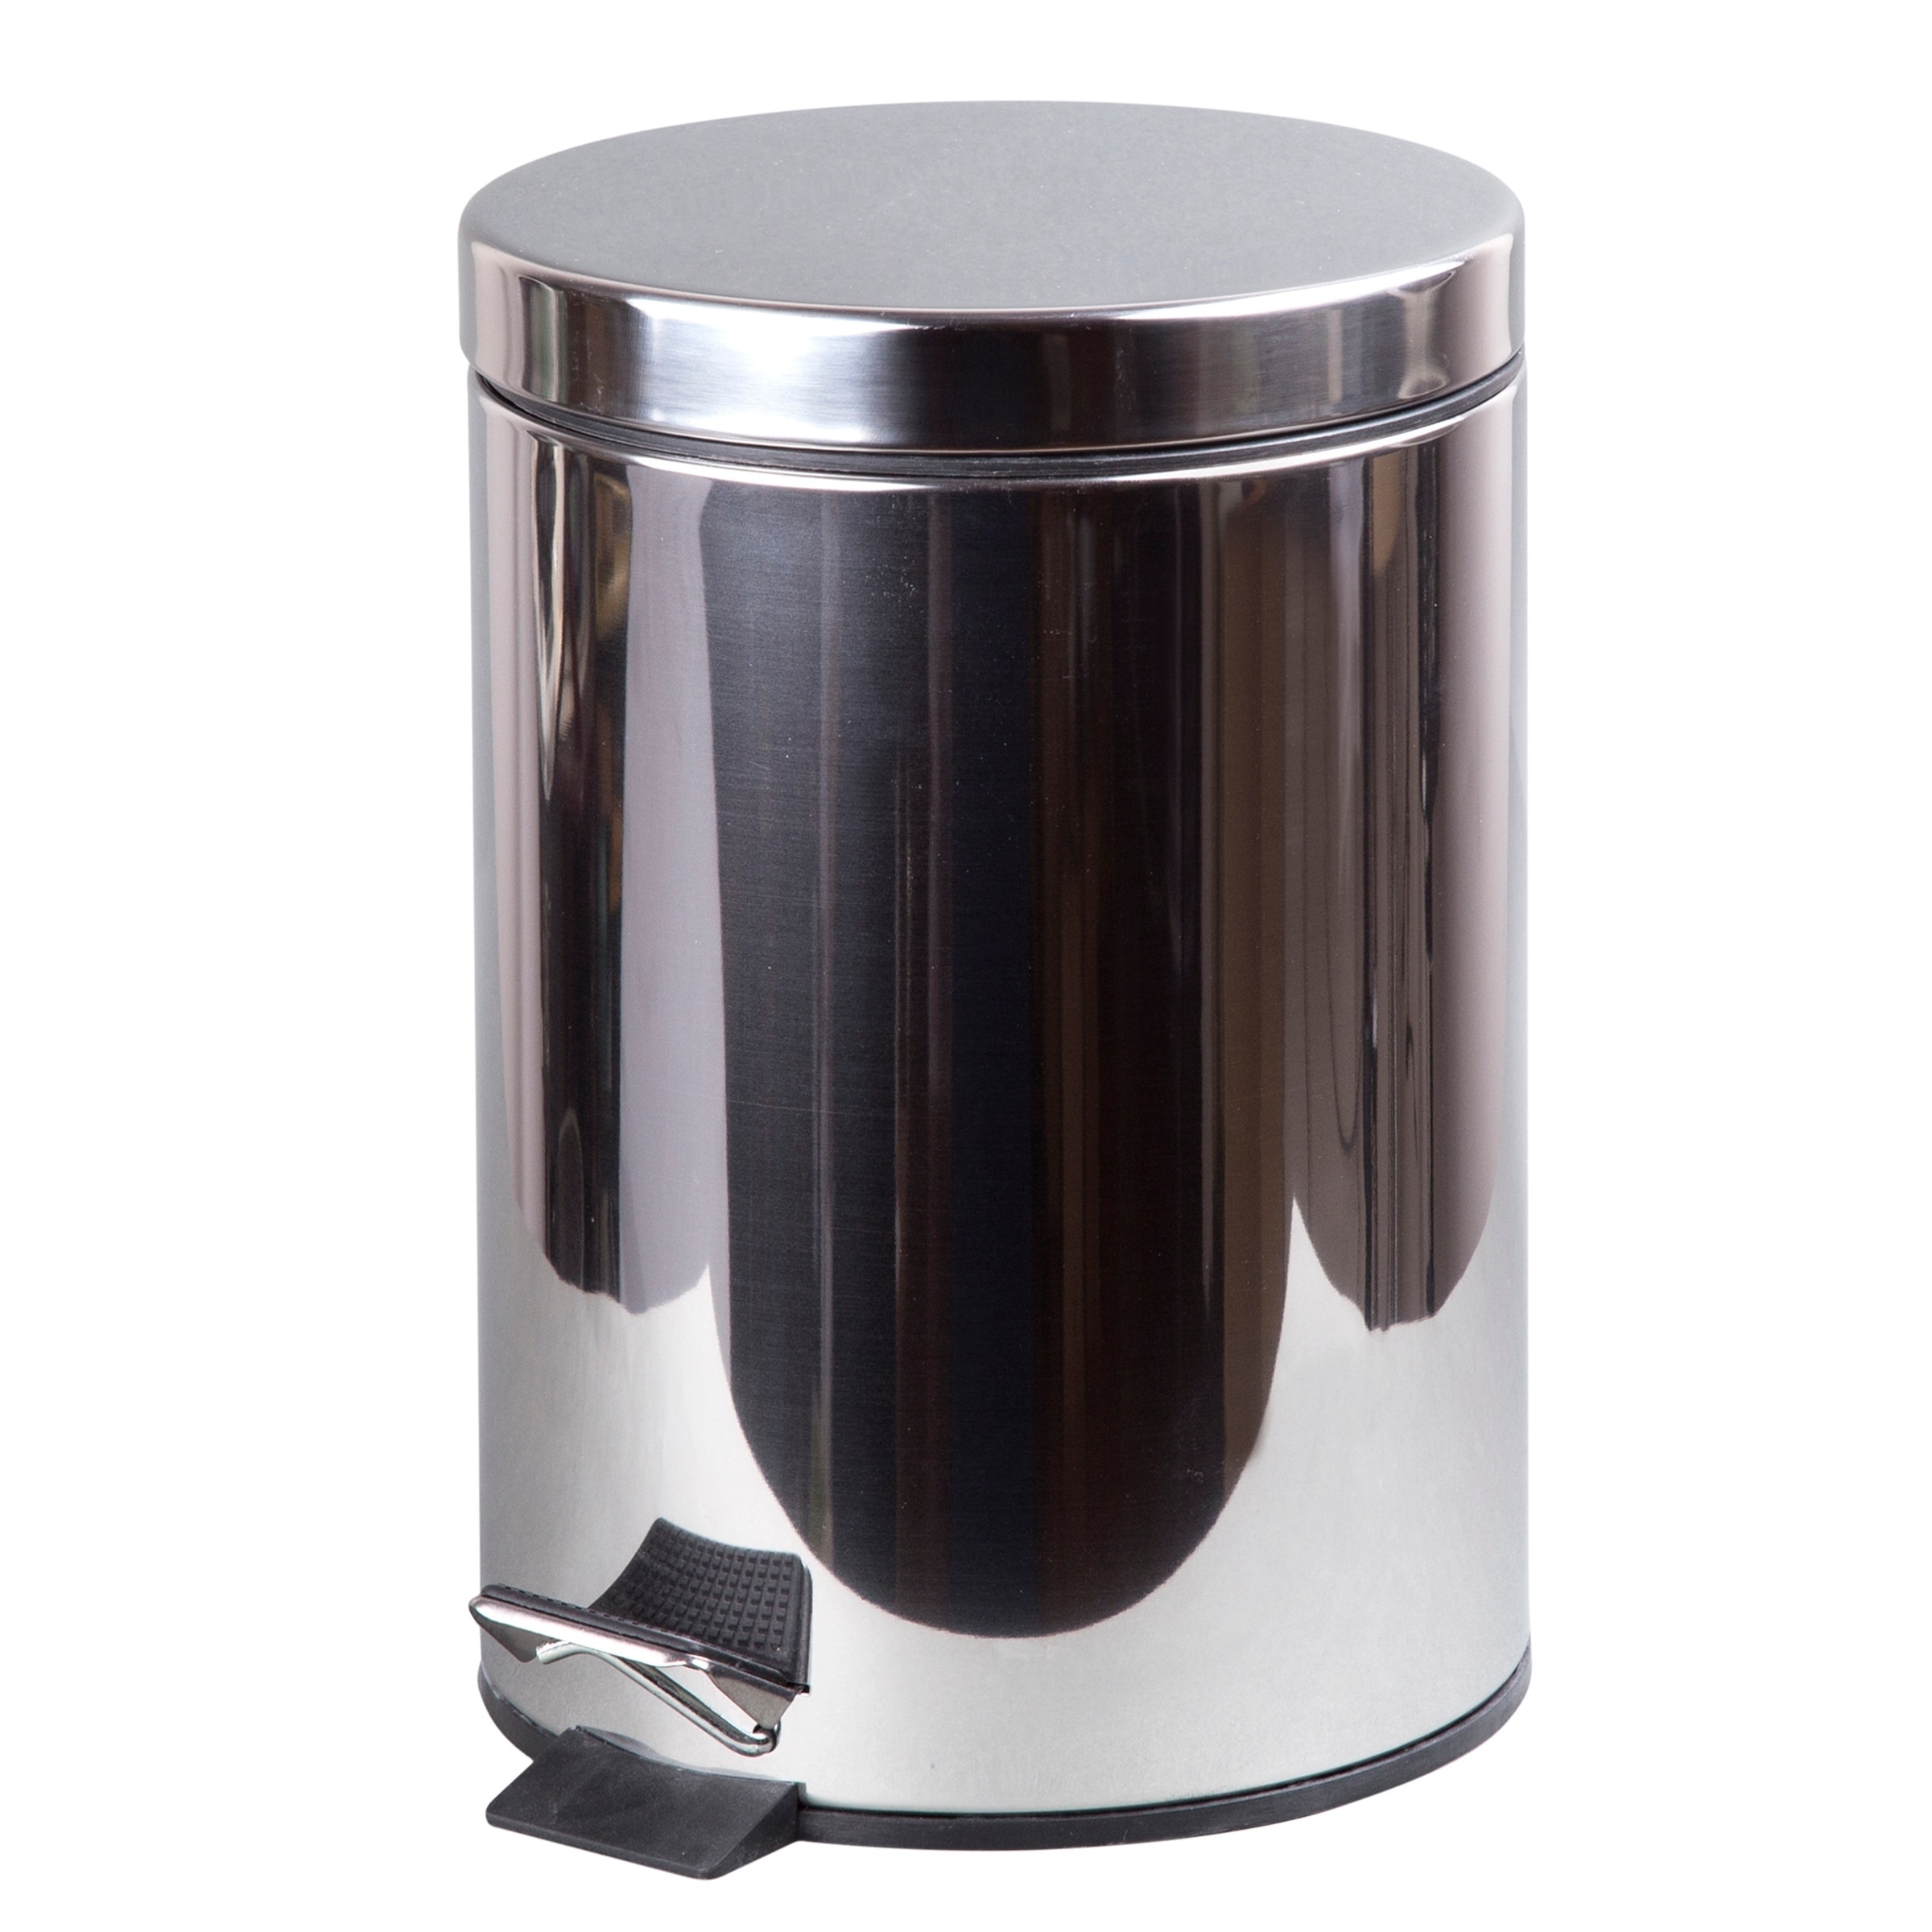 Better Homes & Gardens 1.3 Gallon Trash Can, Oval Bathroom Trash Can,  Stainless